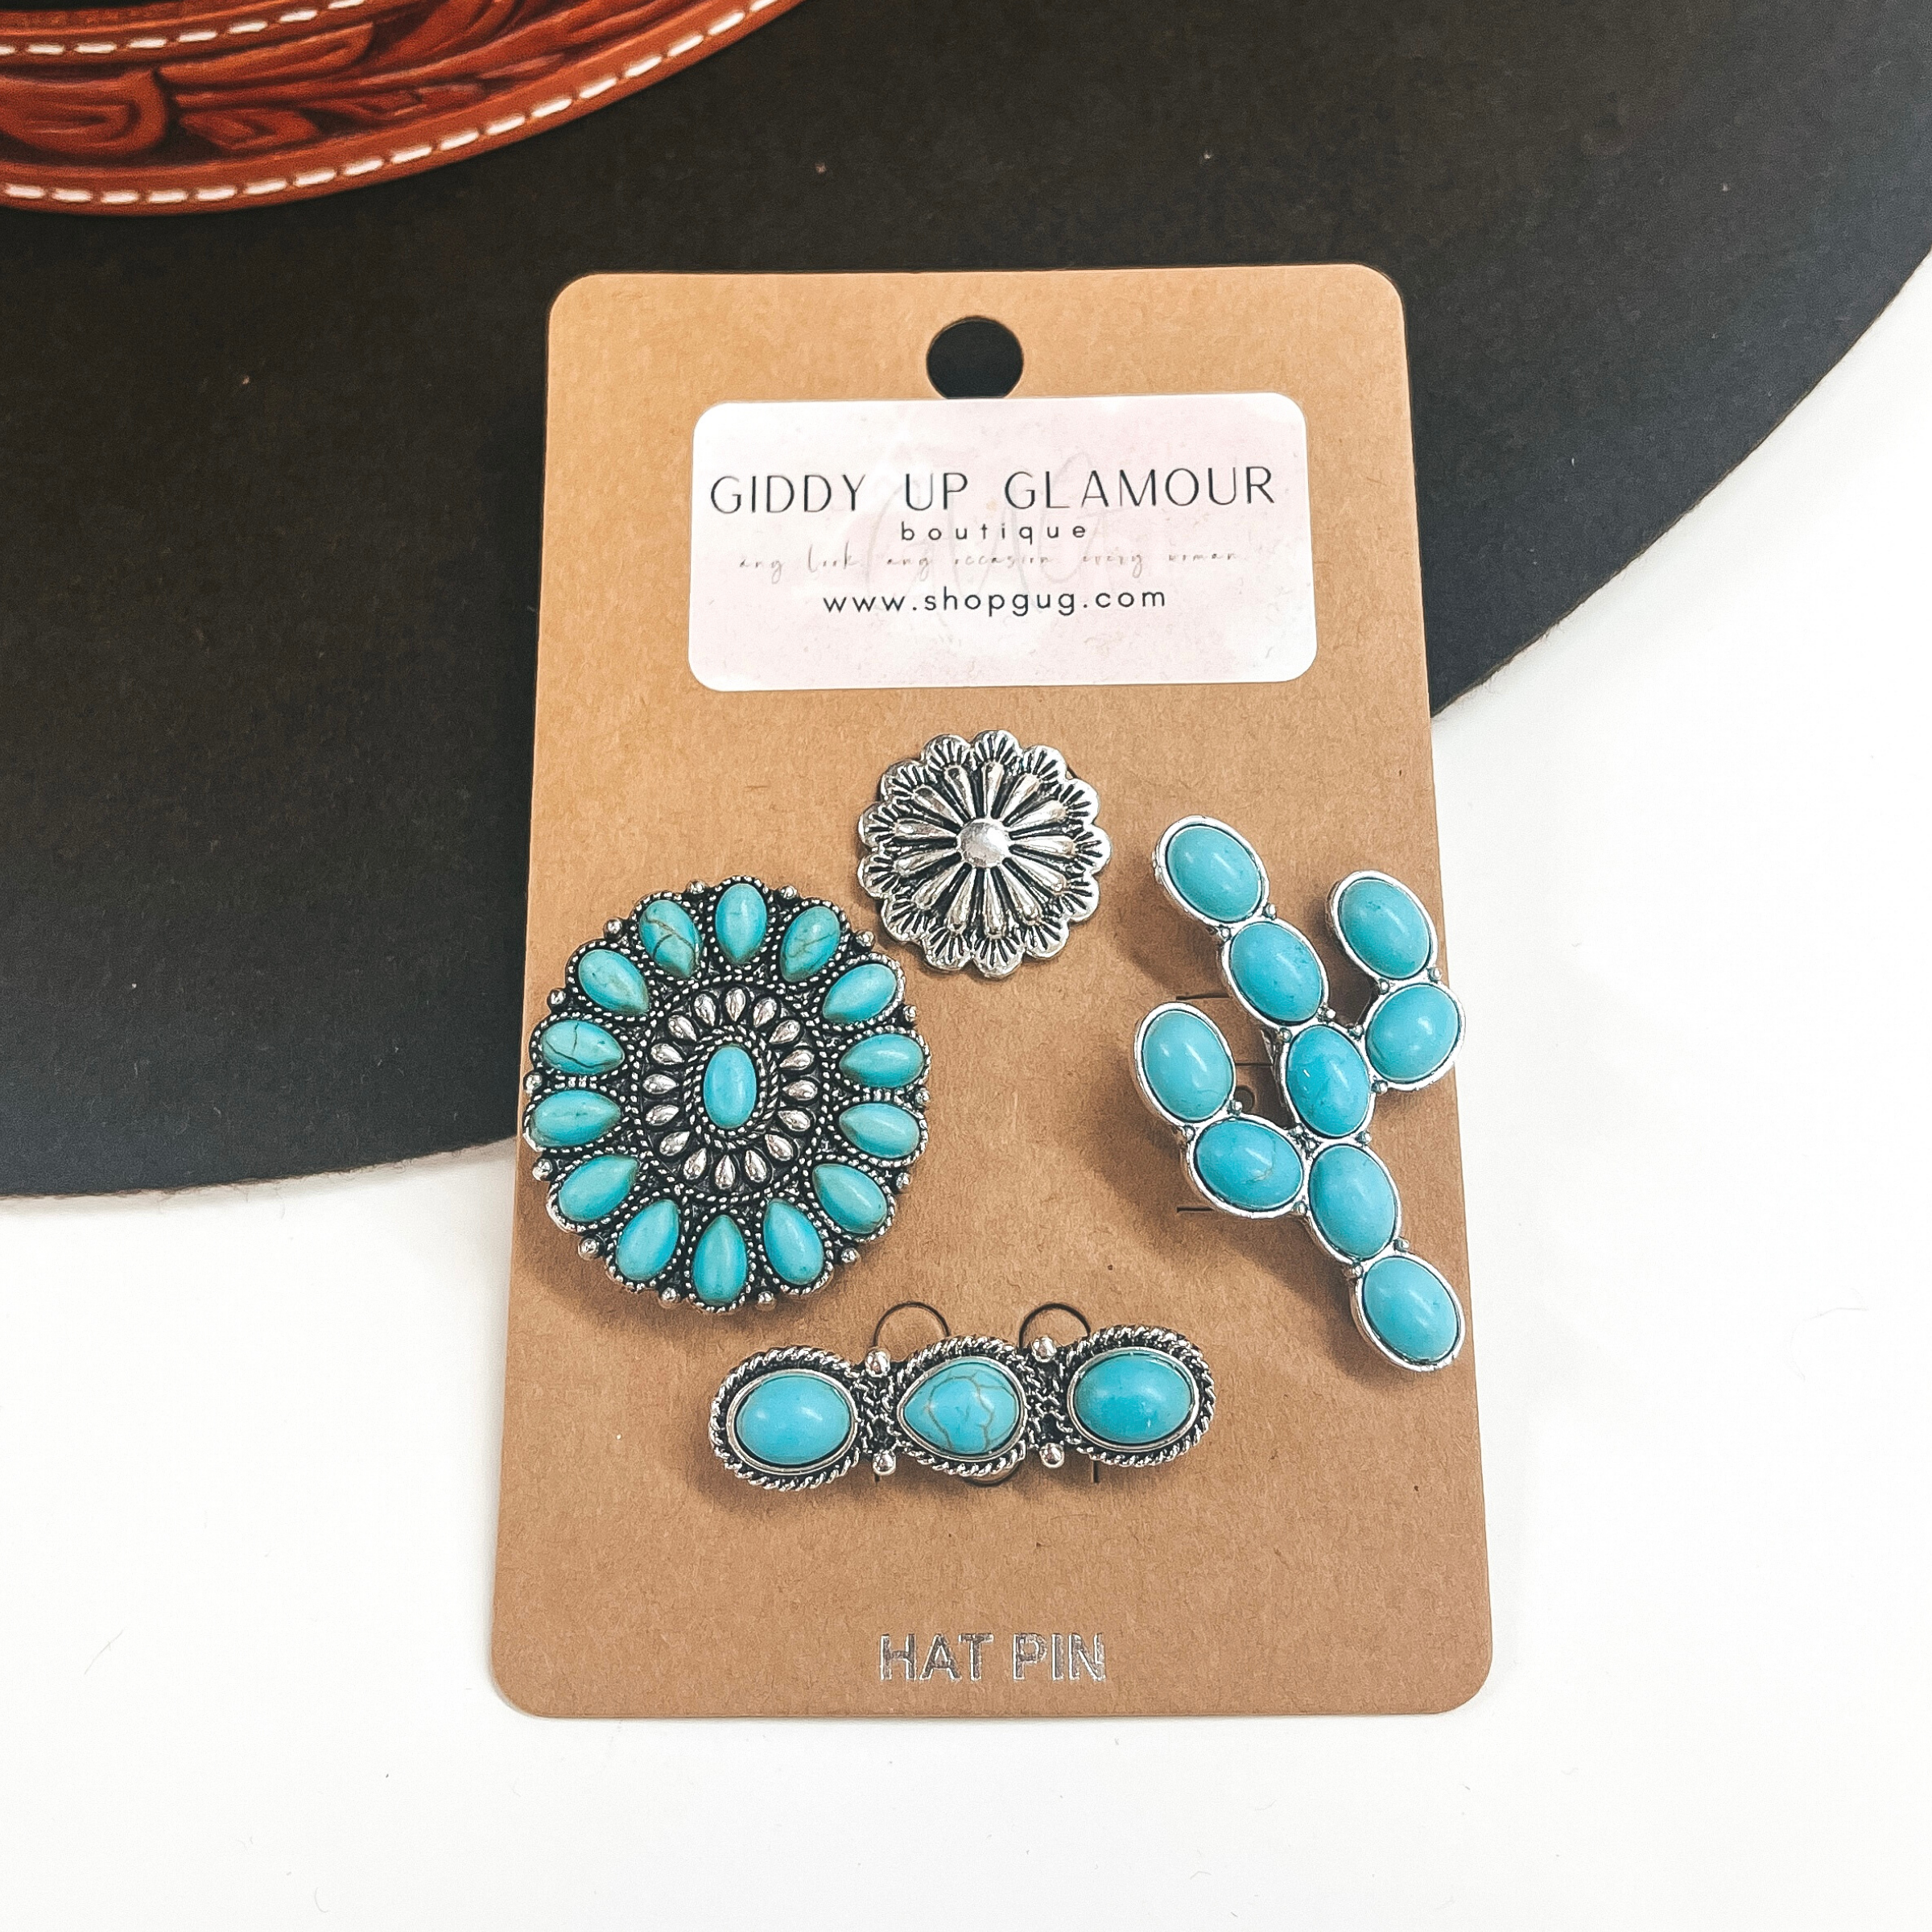 Western Cactus Hat Pin Set in Silver/Turquoise - Giddy Up Glamour Boutique